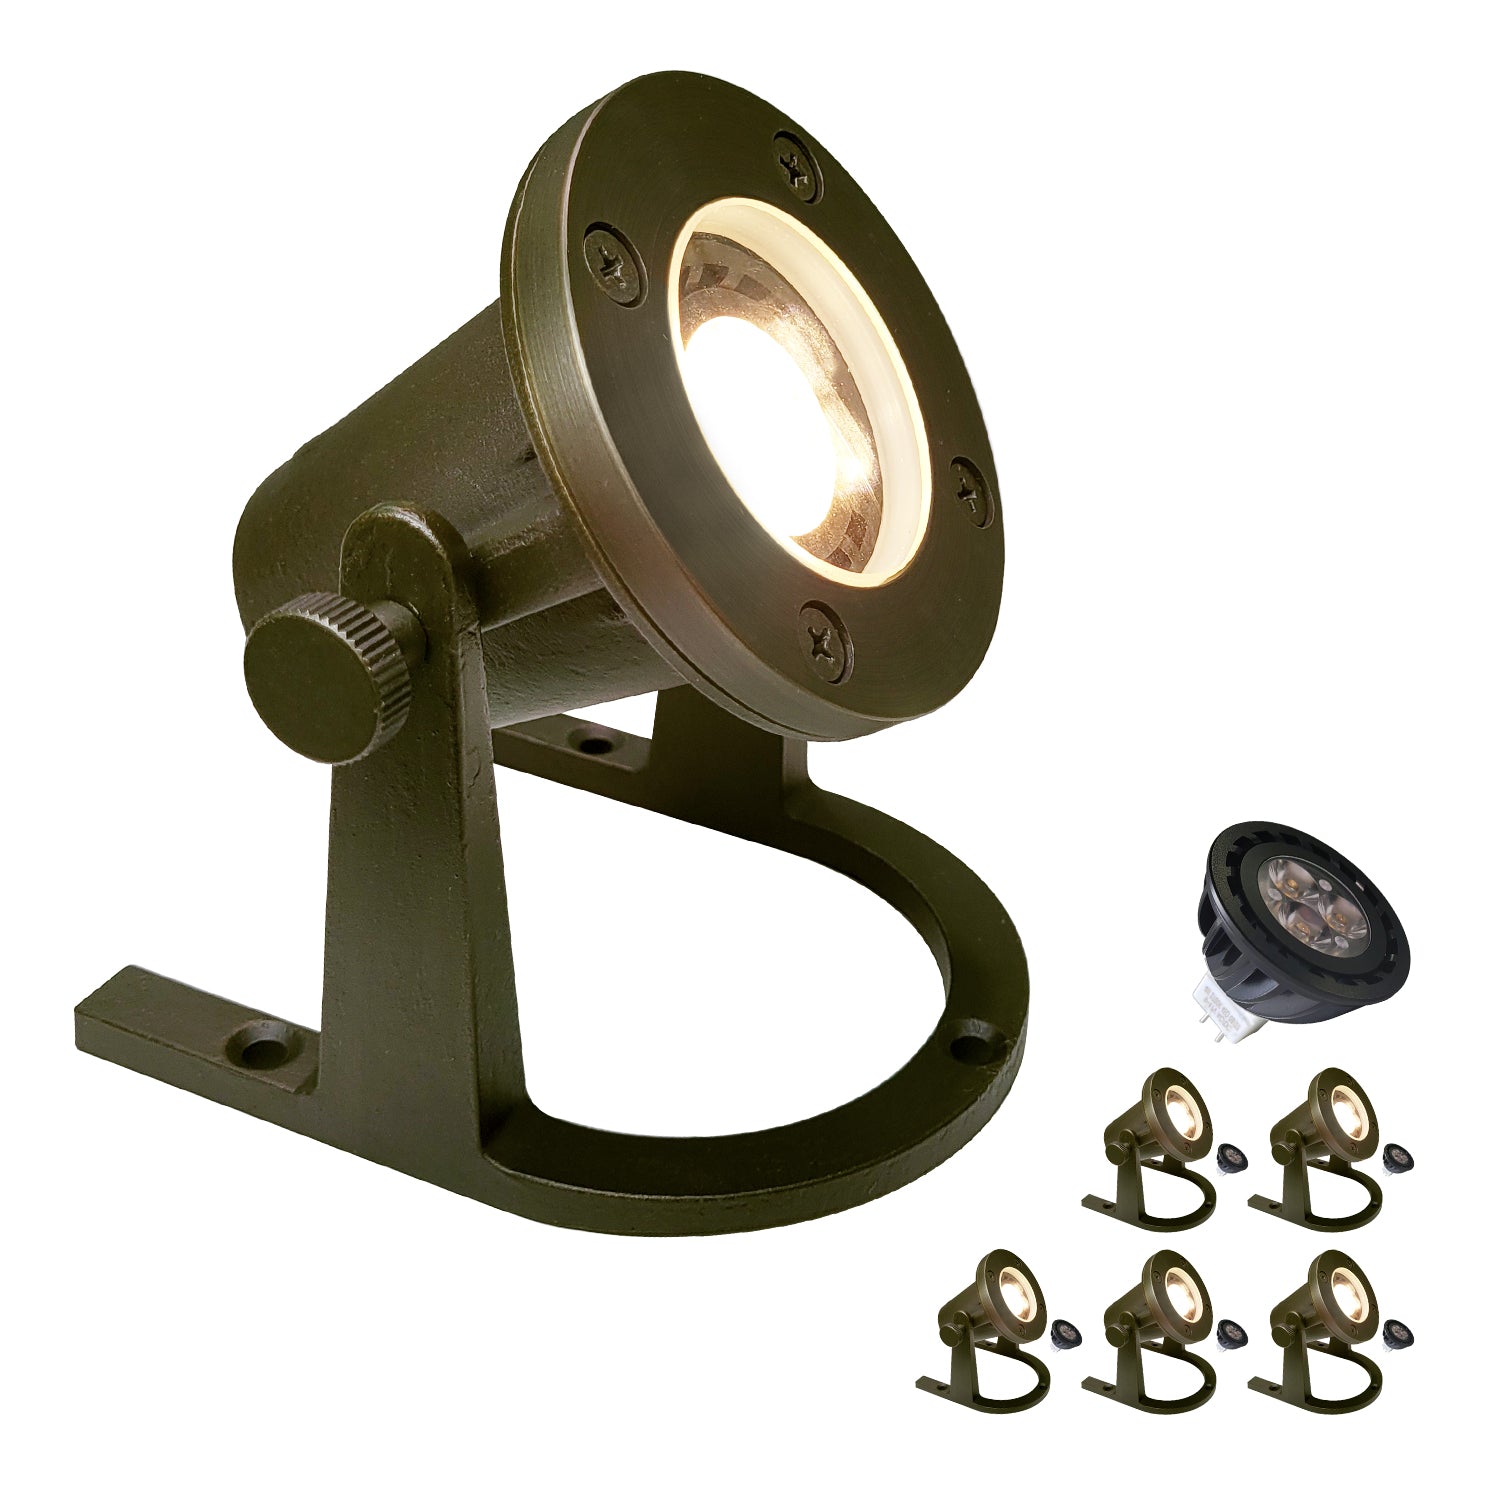 Brass underwater lights COU1201B for submersible waterfall pool fountain, low voltage landscape lighting.